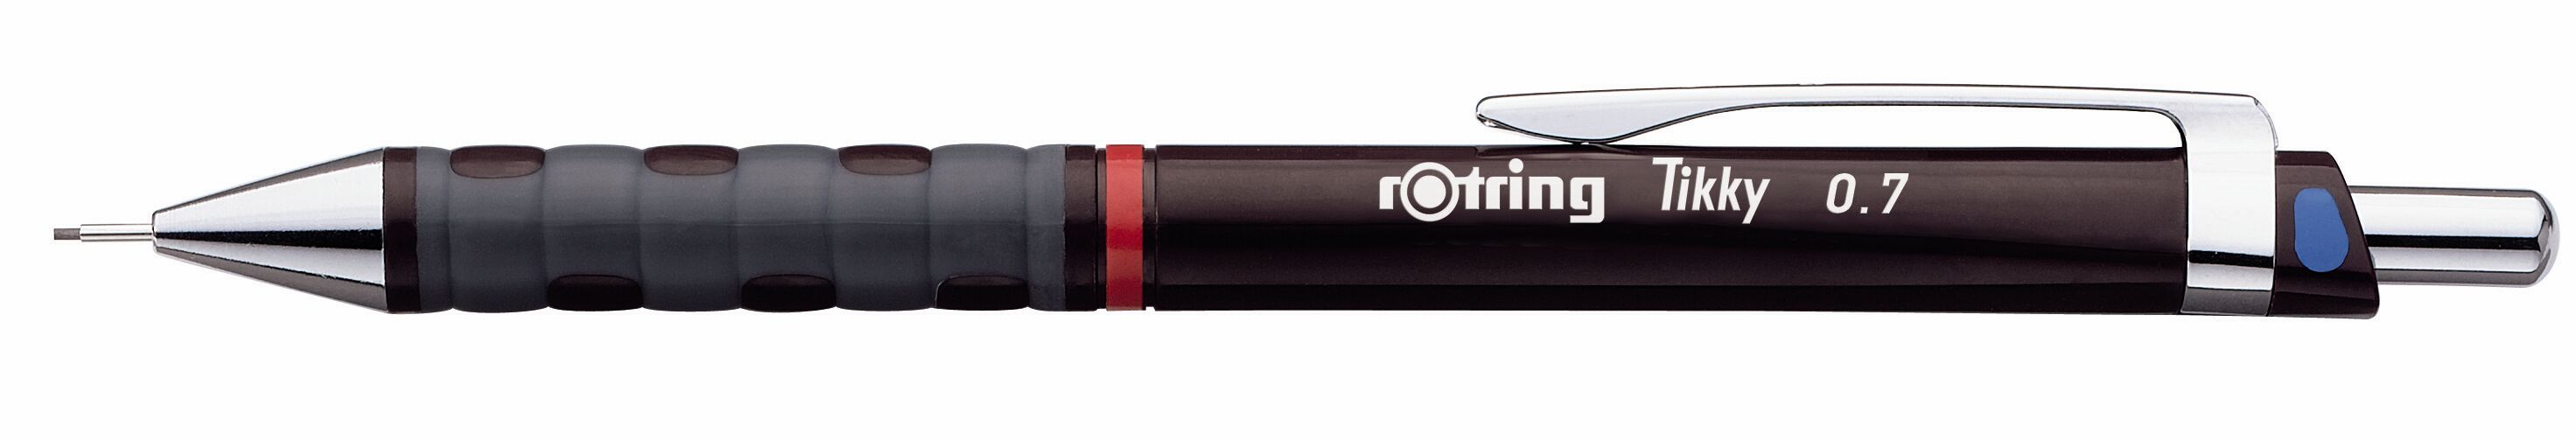 Rotring Tikky Mechanical Pencil, 0.7 mm, Brown